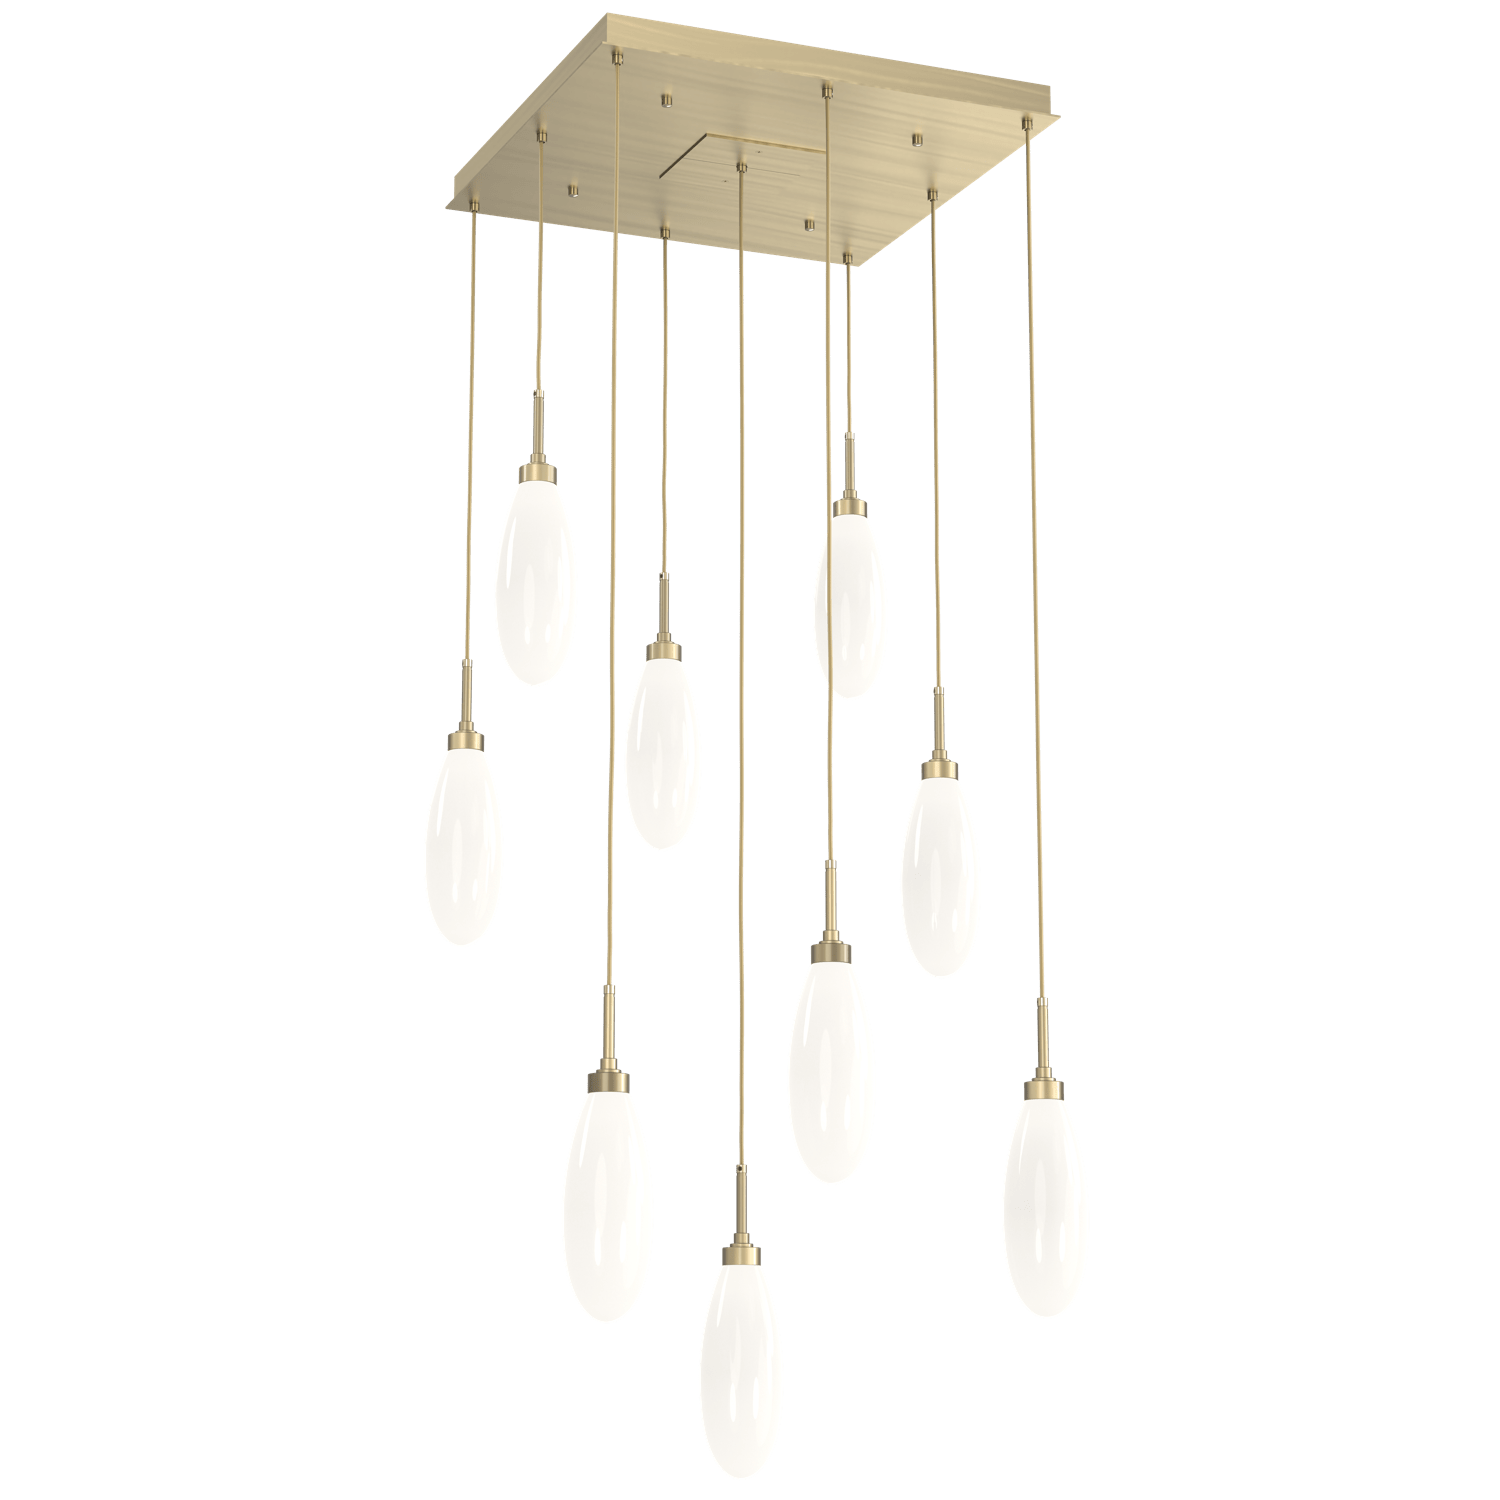 CHB0071-09-HB-WL-LL-Hammerton-Studio-Fiori-9-light-square-pendant-chandelier-with-heritage-brass-finish-and-opal-white-glass-shades-and-LED-lamping